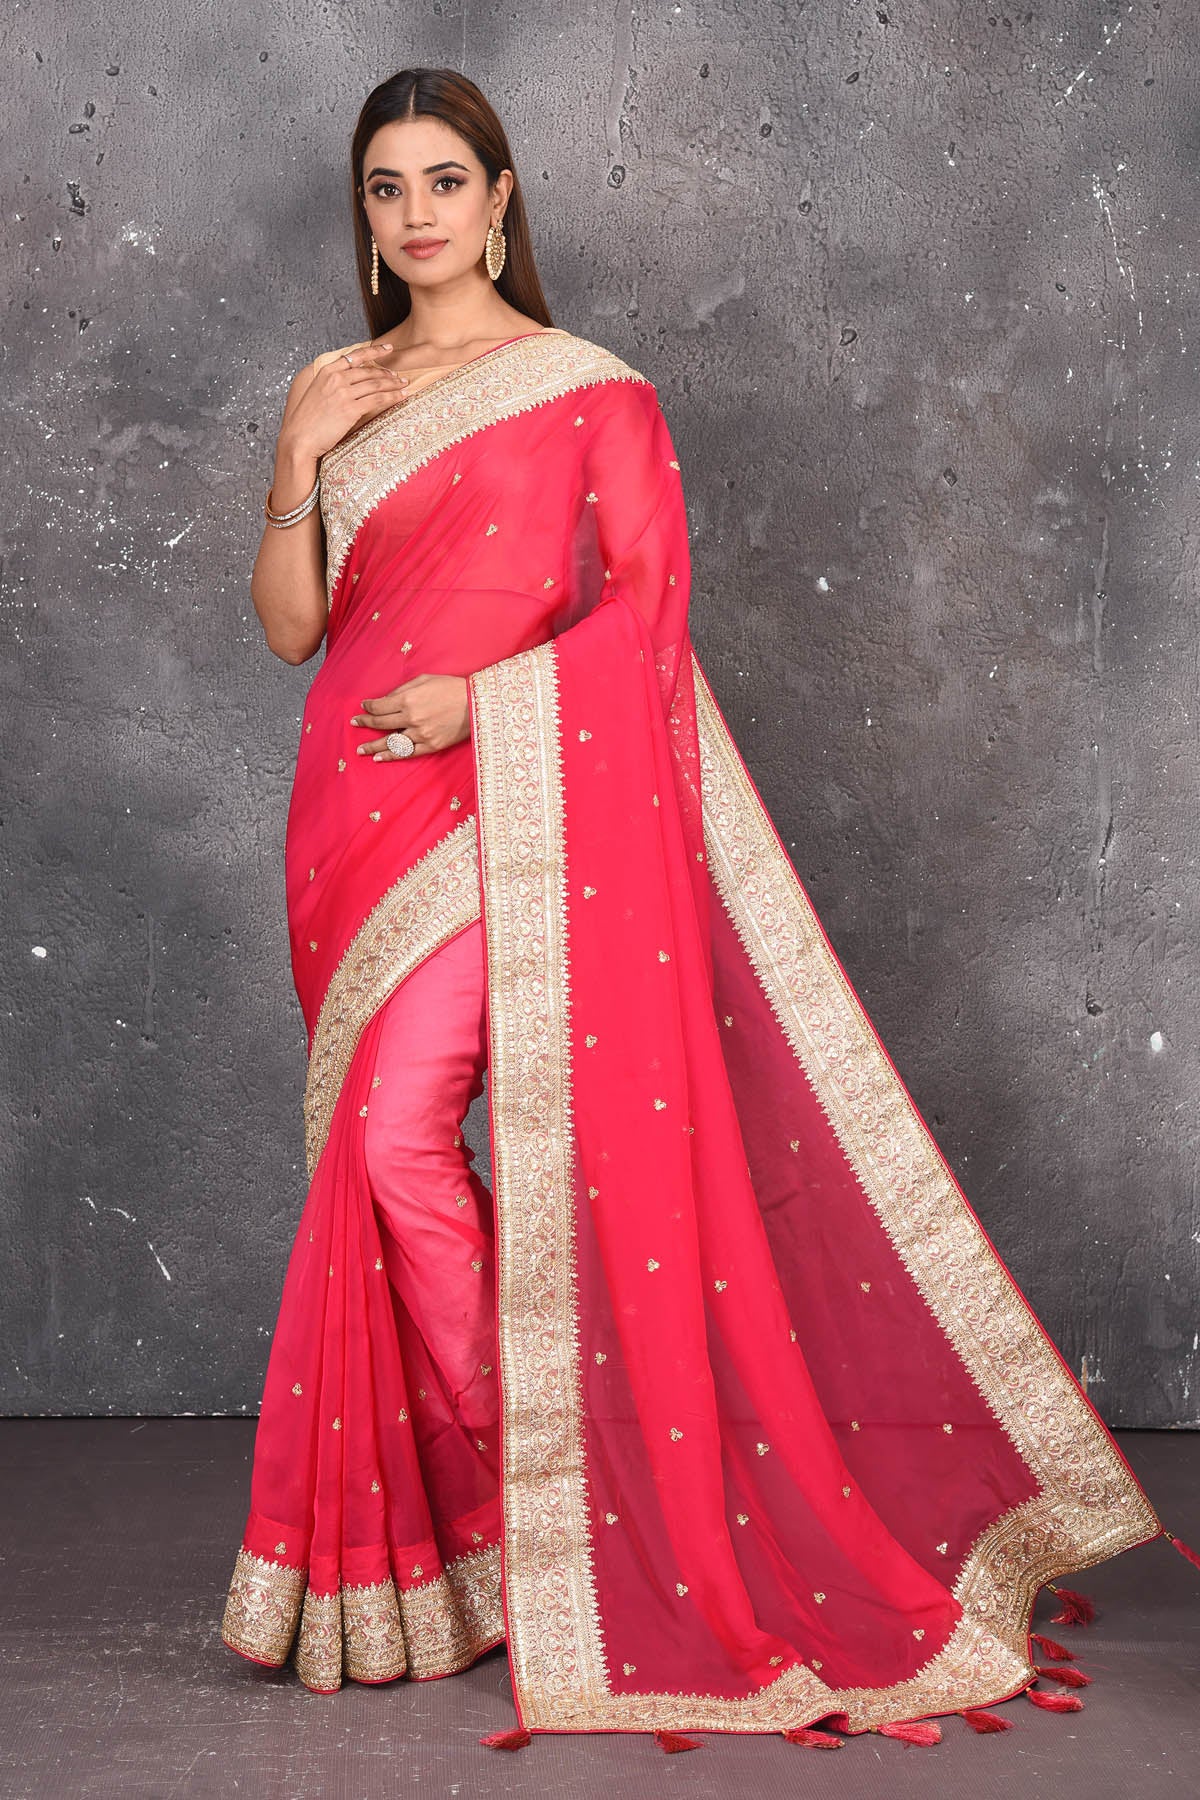 Shop exquisite pink georgette banarasi designer saree with golden heavy Border online in USA which has crafted by skilled weaver of Banaras with elegance and grace, this saree is definitely the epitome of beauty and a must have in your collection. Buy designer handwoven banarasi georgette sari with any blouse from Pure Elegance Indian saree store in USA.-Full view with open pallu.